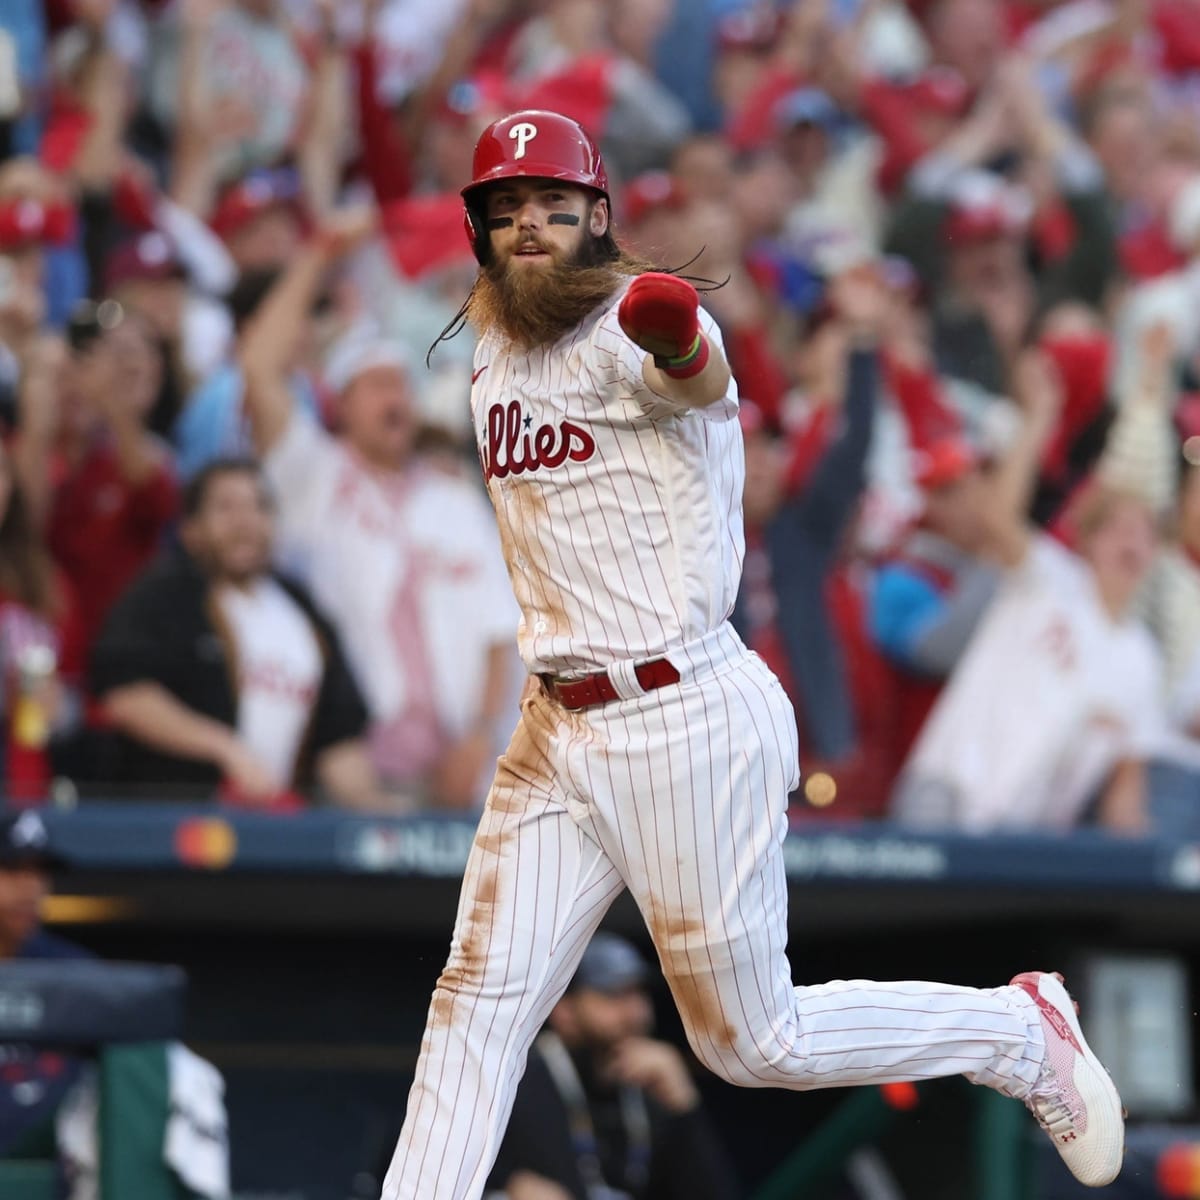 WATCH: Brandon Marsh Launches Home Run to Give Phillies 3-0 Lead